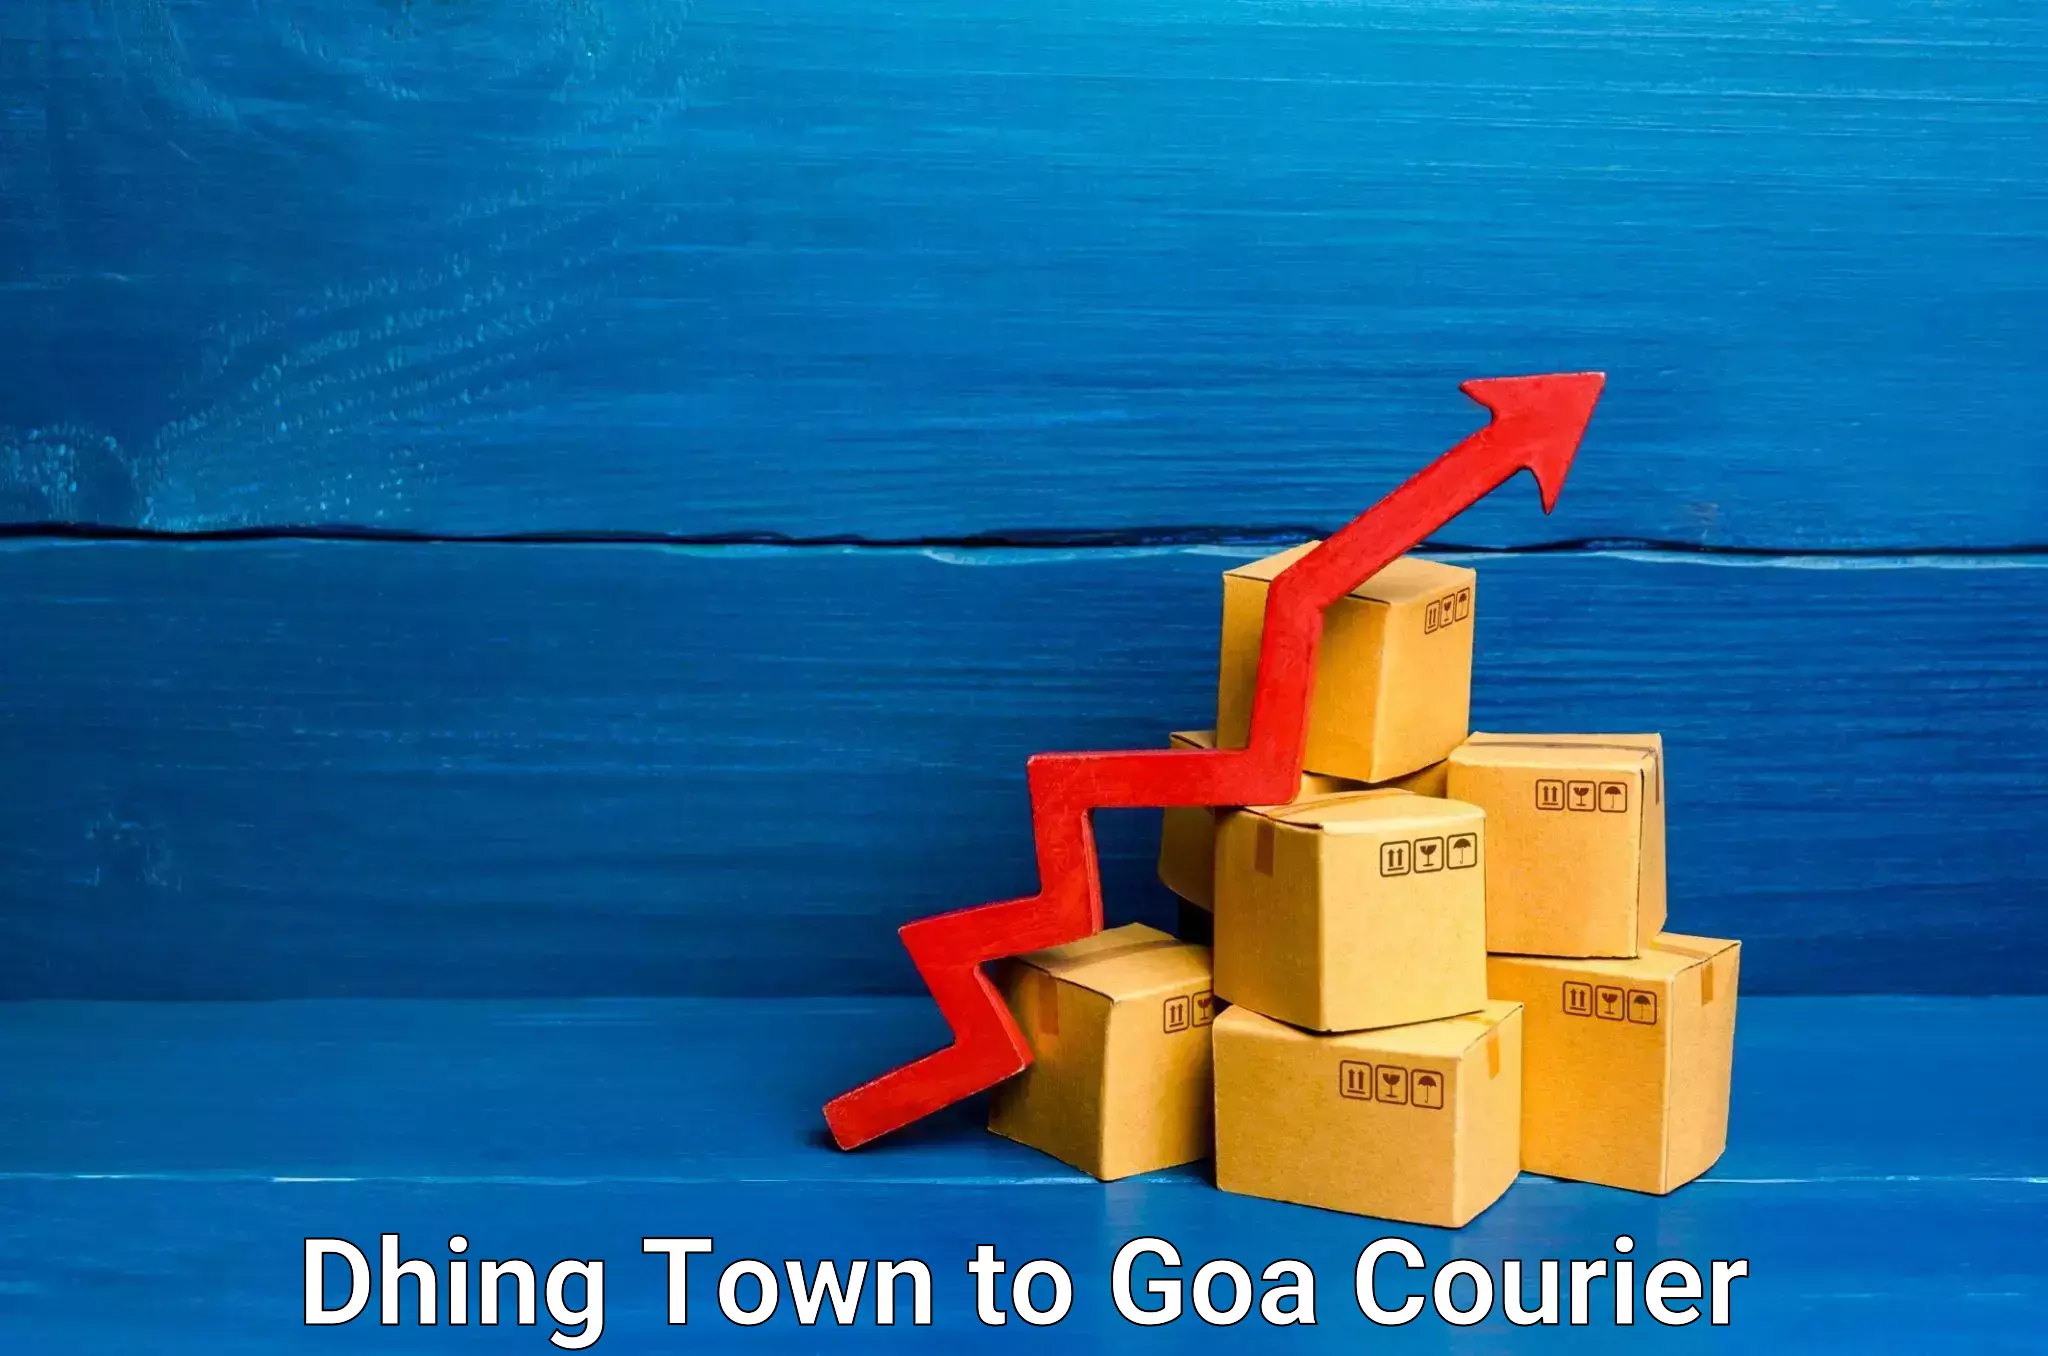 Global courier networks Dhing Town to South Goa